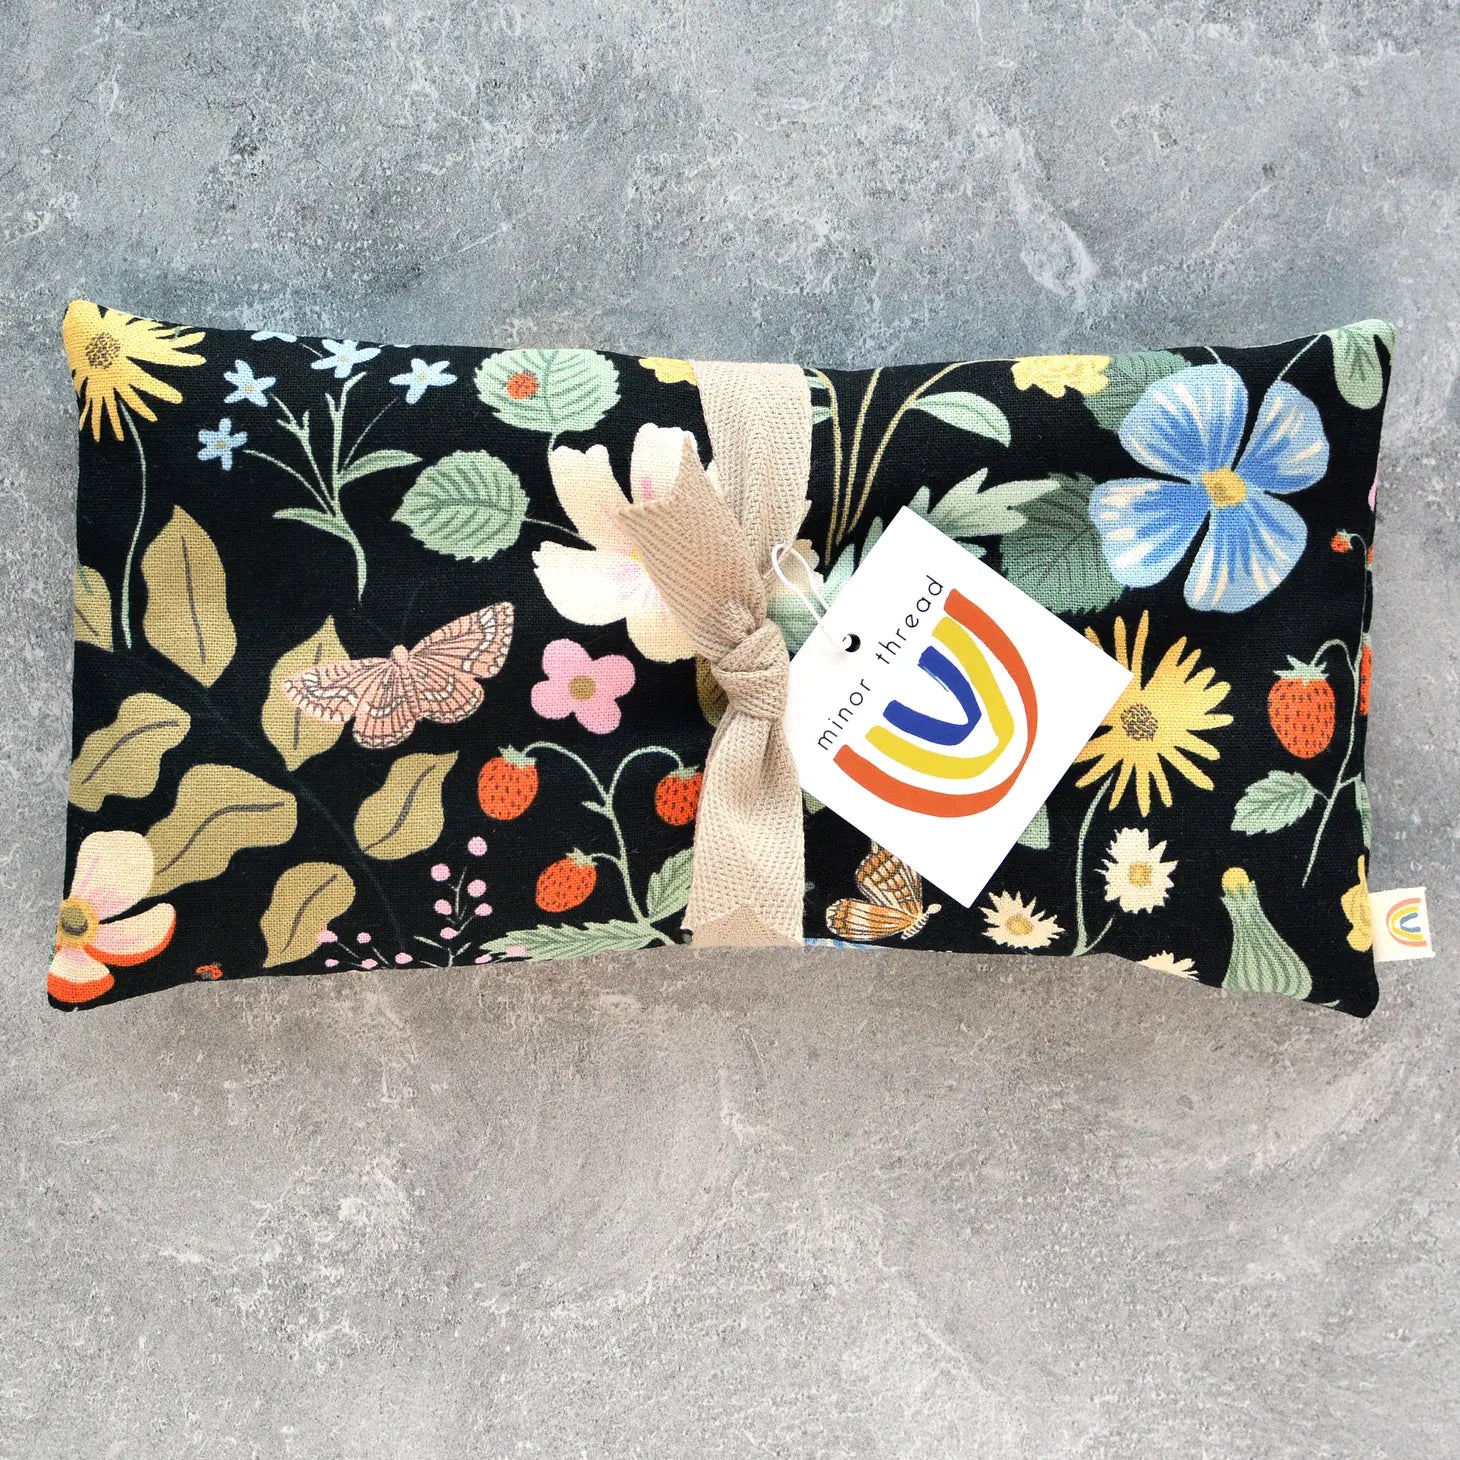 Minor Thread Oversized Eye Pillow In Strawberry Fields Floral In Black - Lavender available at The Good Life Boutique